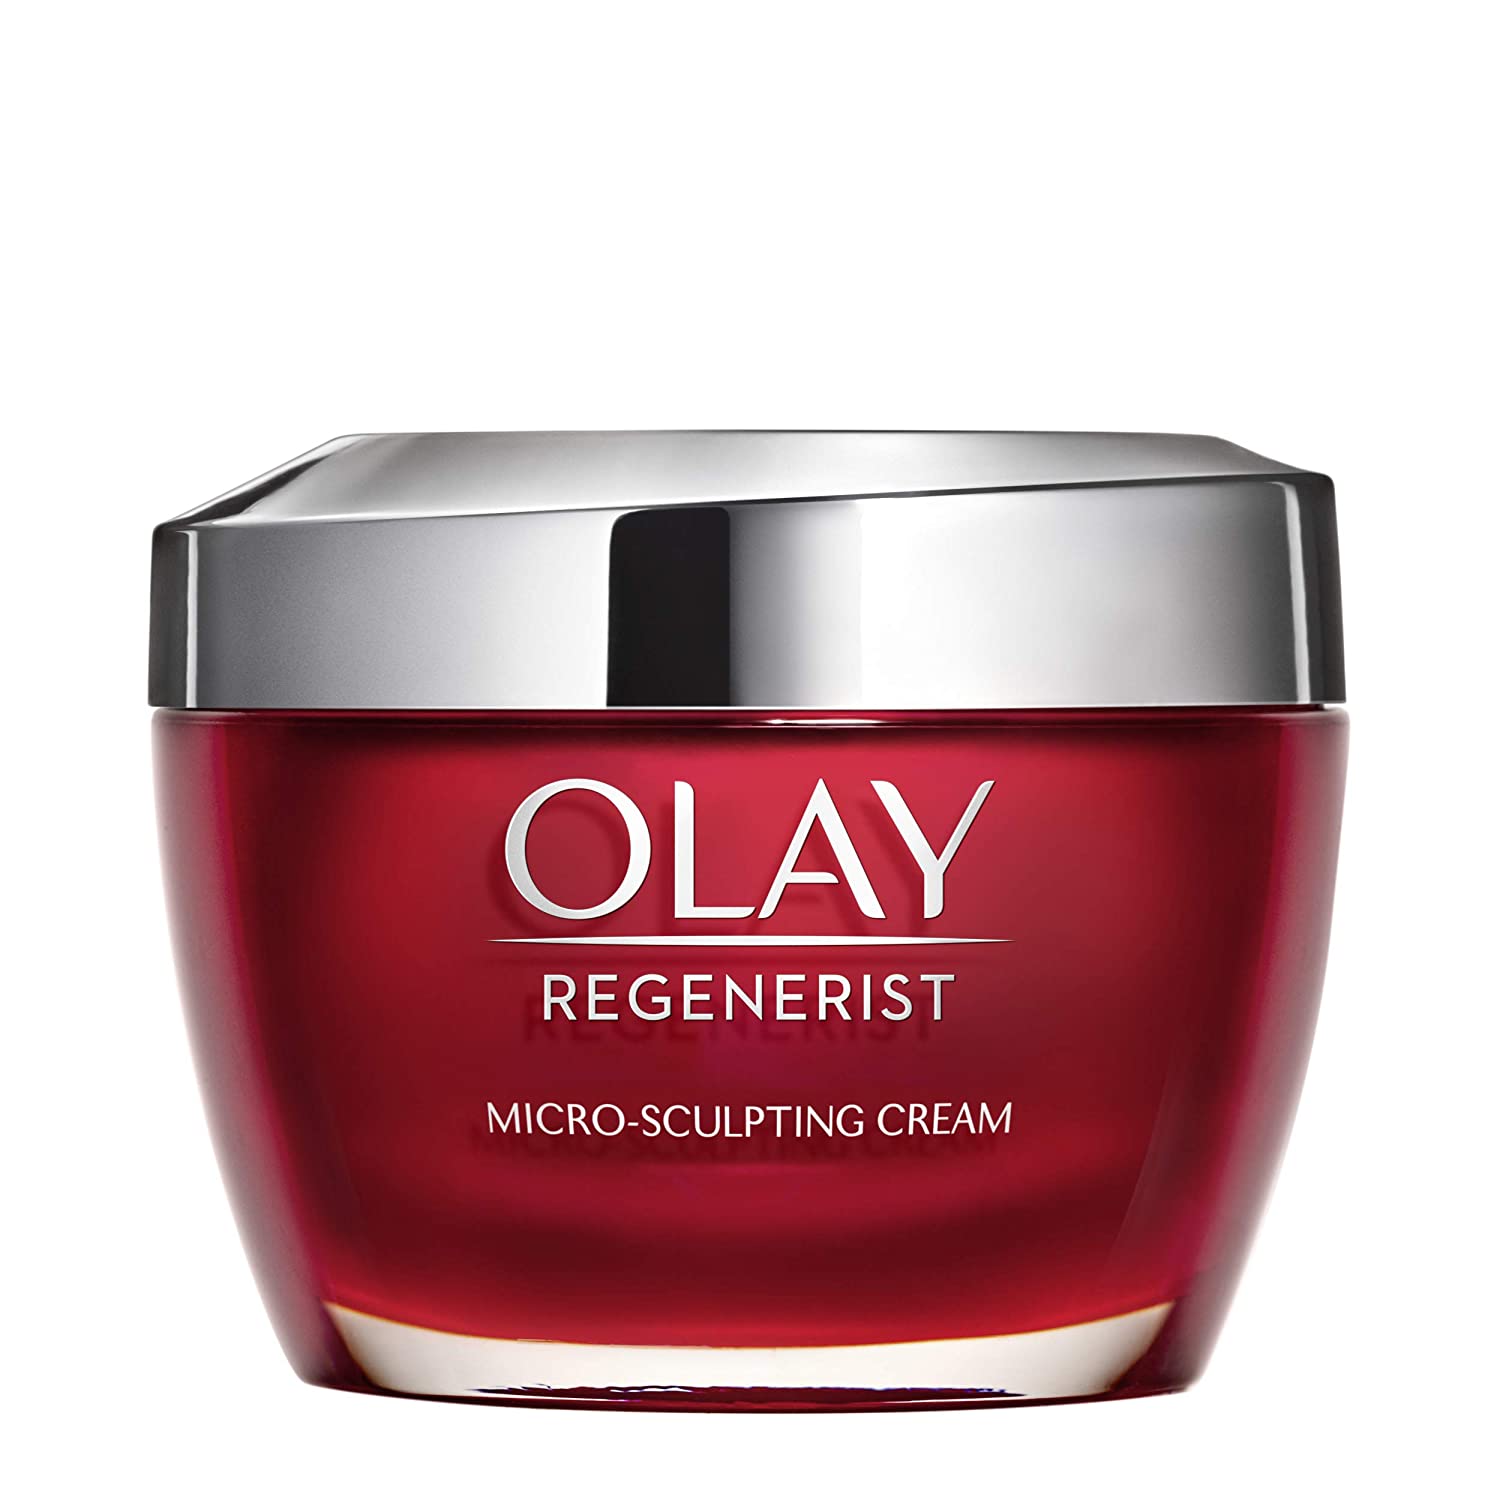 Face Moisturizer with Collagen Peptides by Olay Regenerist Micro-Sculpting Cream 1.7 oz, 2 Month Supply